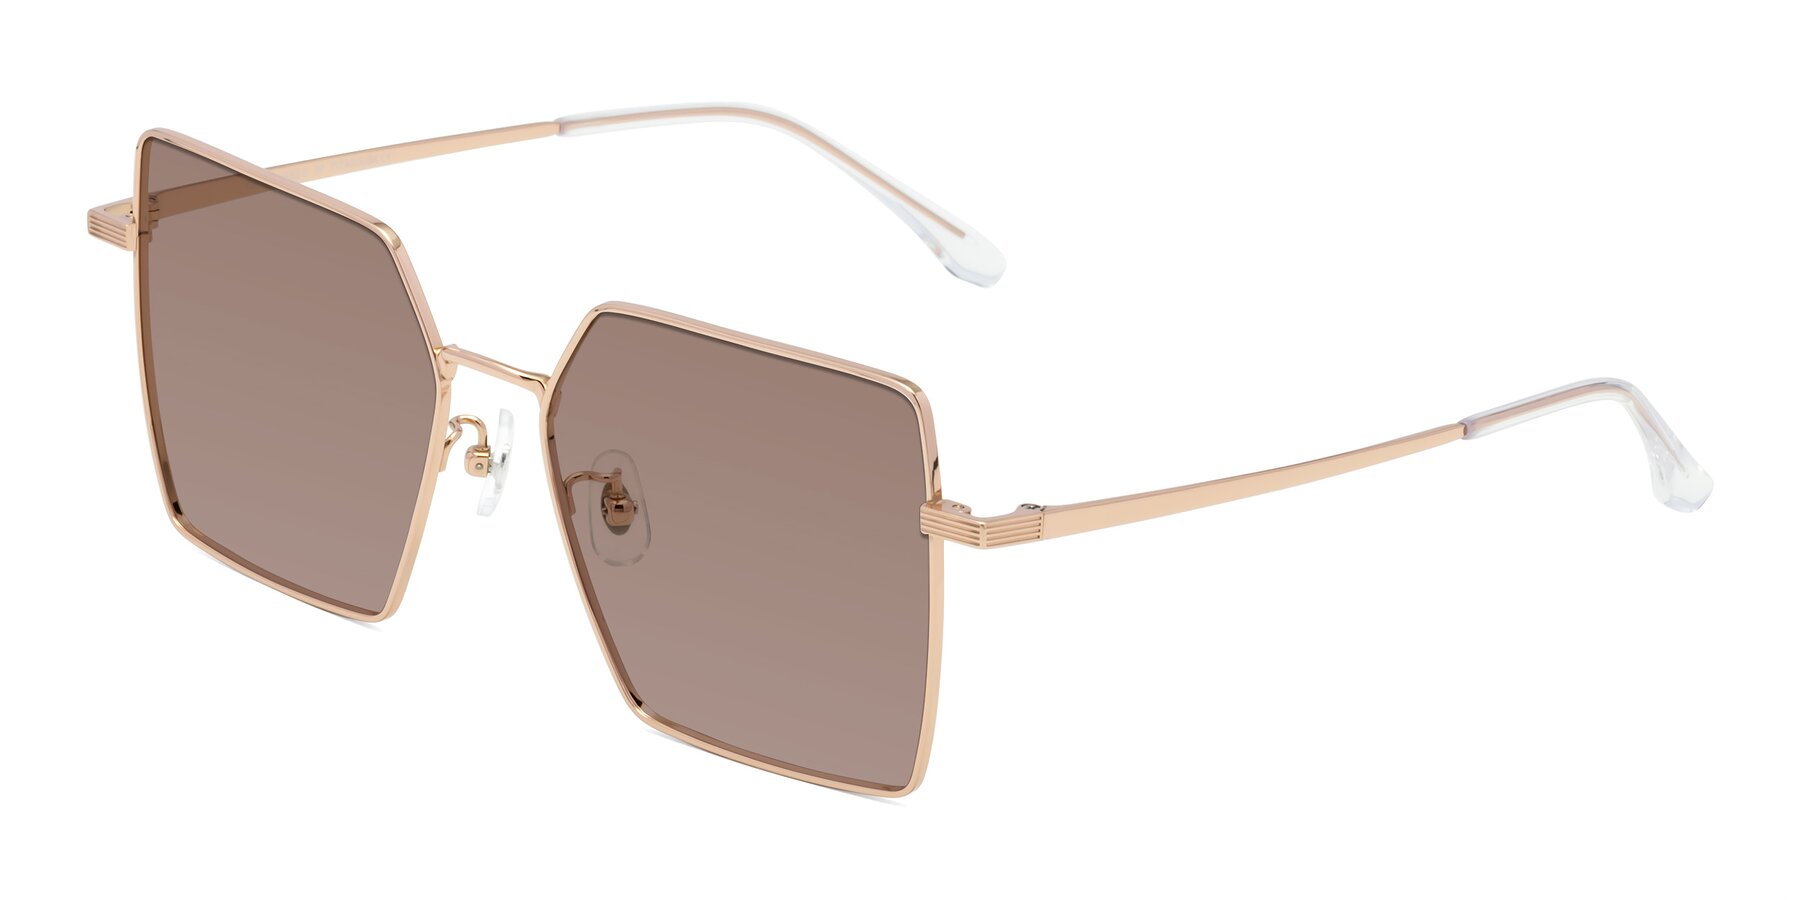 Angle of La Villa in Rose Gold with Medium Brown Tinted Lenses